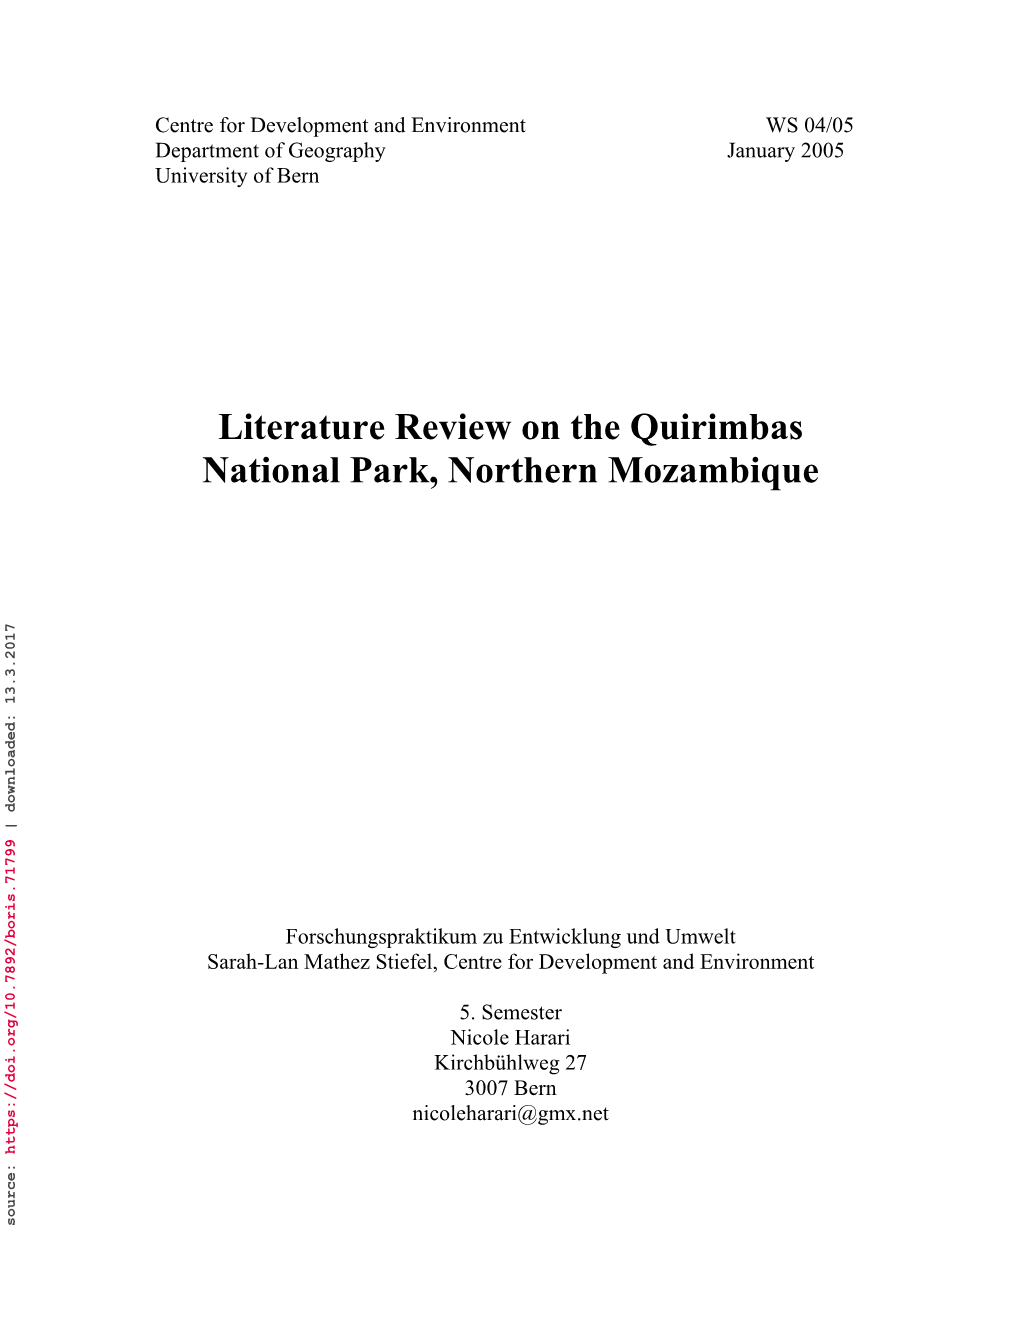 Literature Review on the Quirimbas National Park, Northern Mozambique